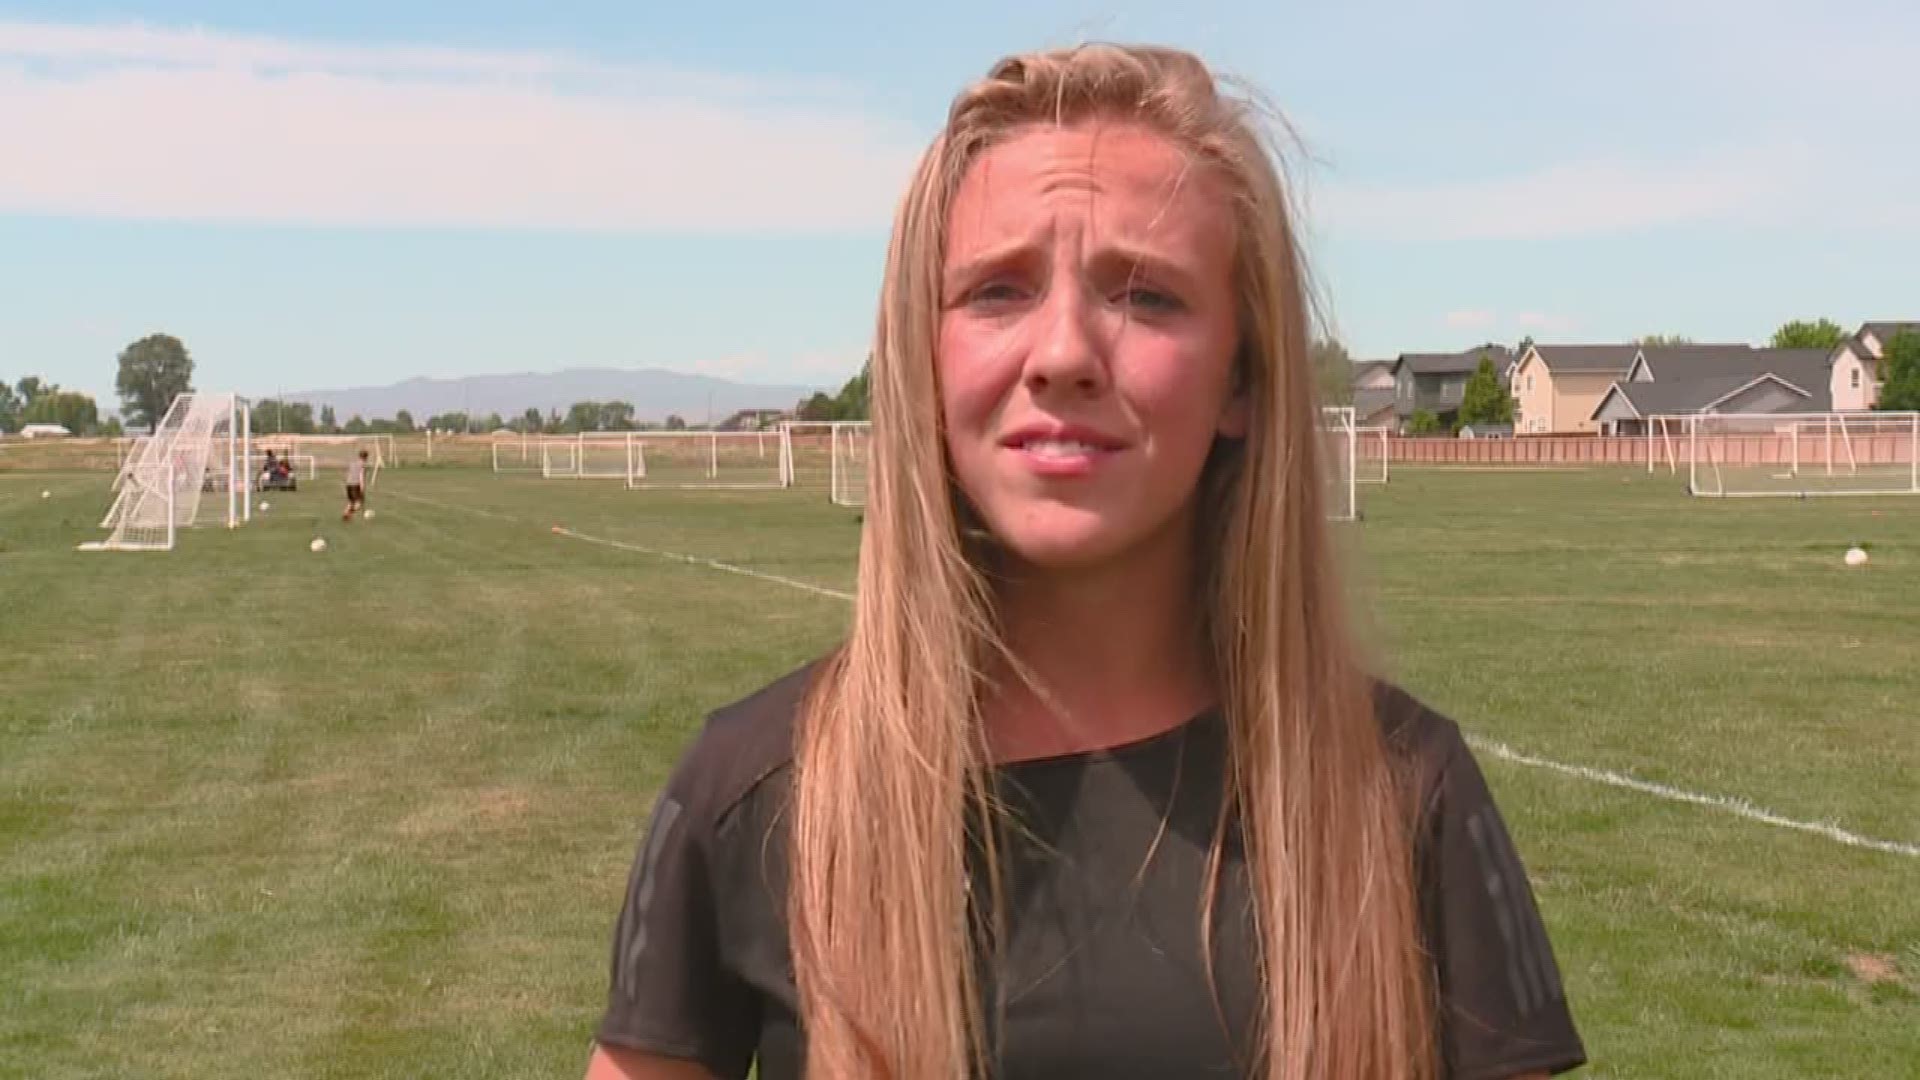 Mountain View runner Lexy Halladay broke the record for the fastest mile run by a freshman